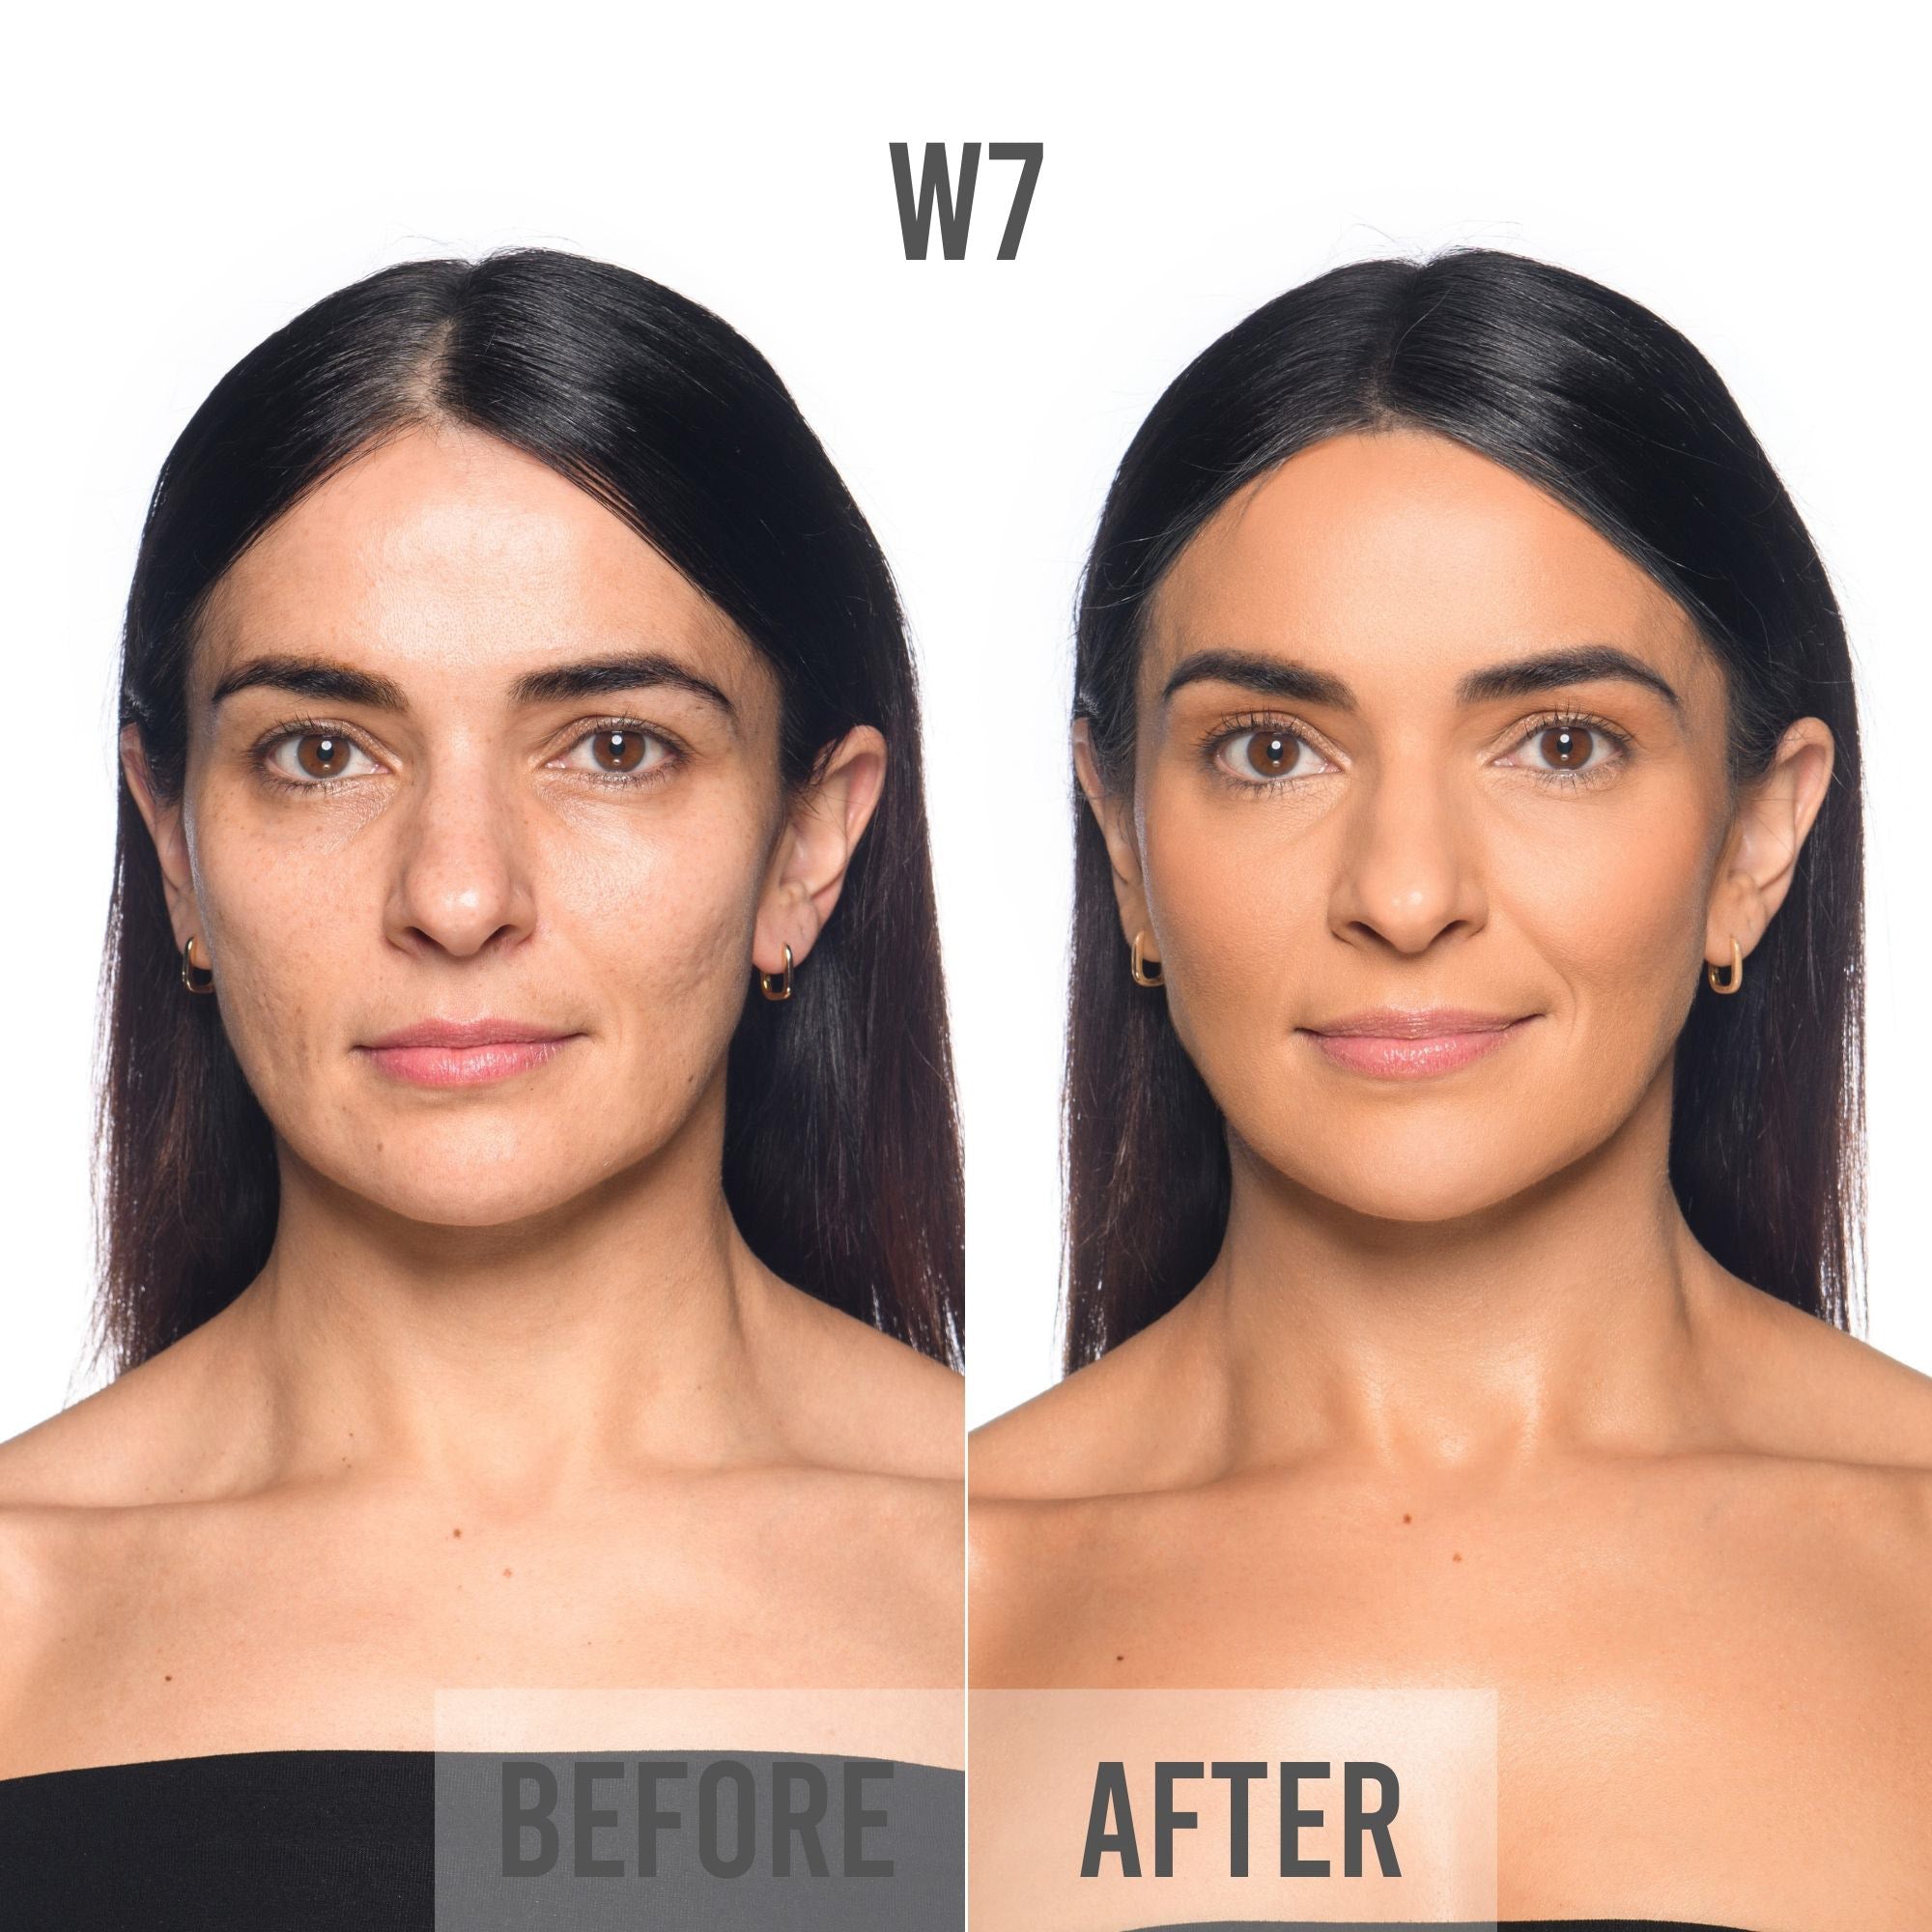 bPerfect CHROMA Cover Matte Foundation, W7 before &amp; after